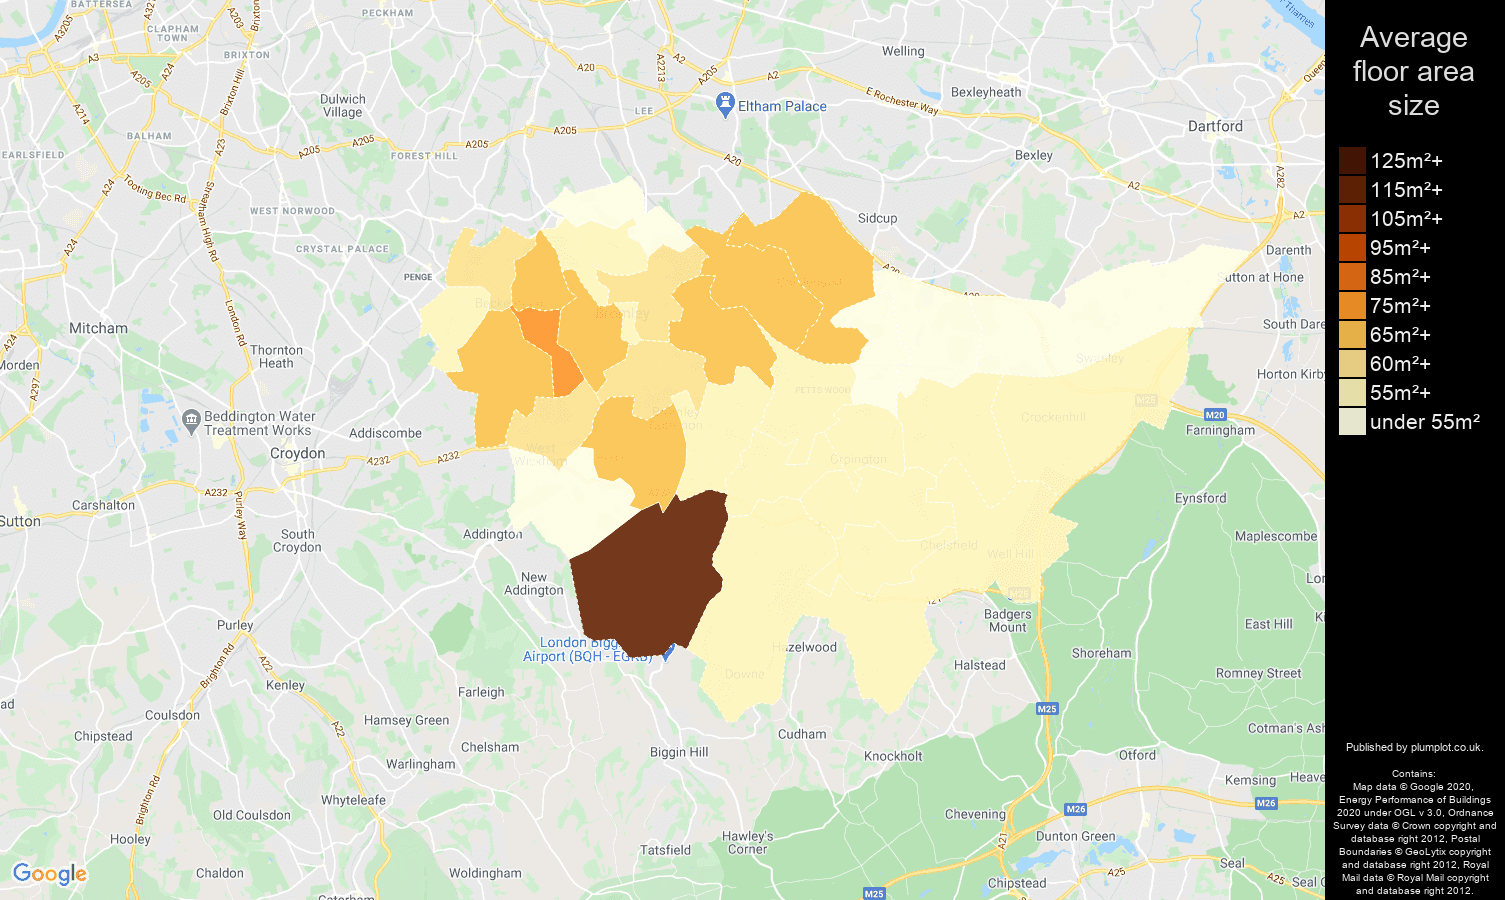 Bromley map of average floor area size of flats